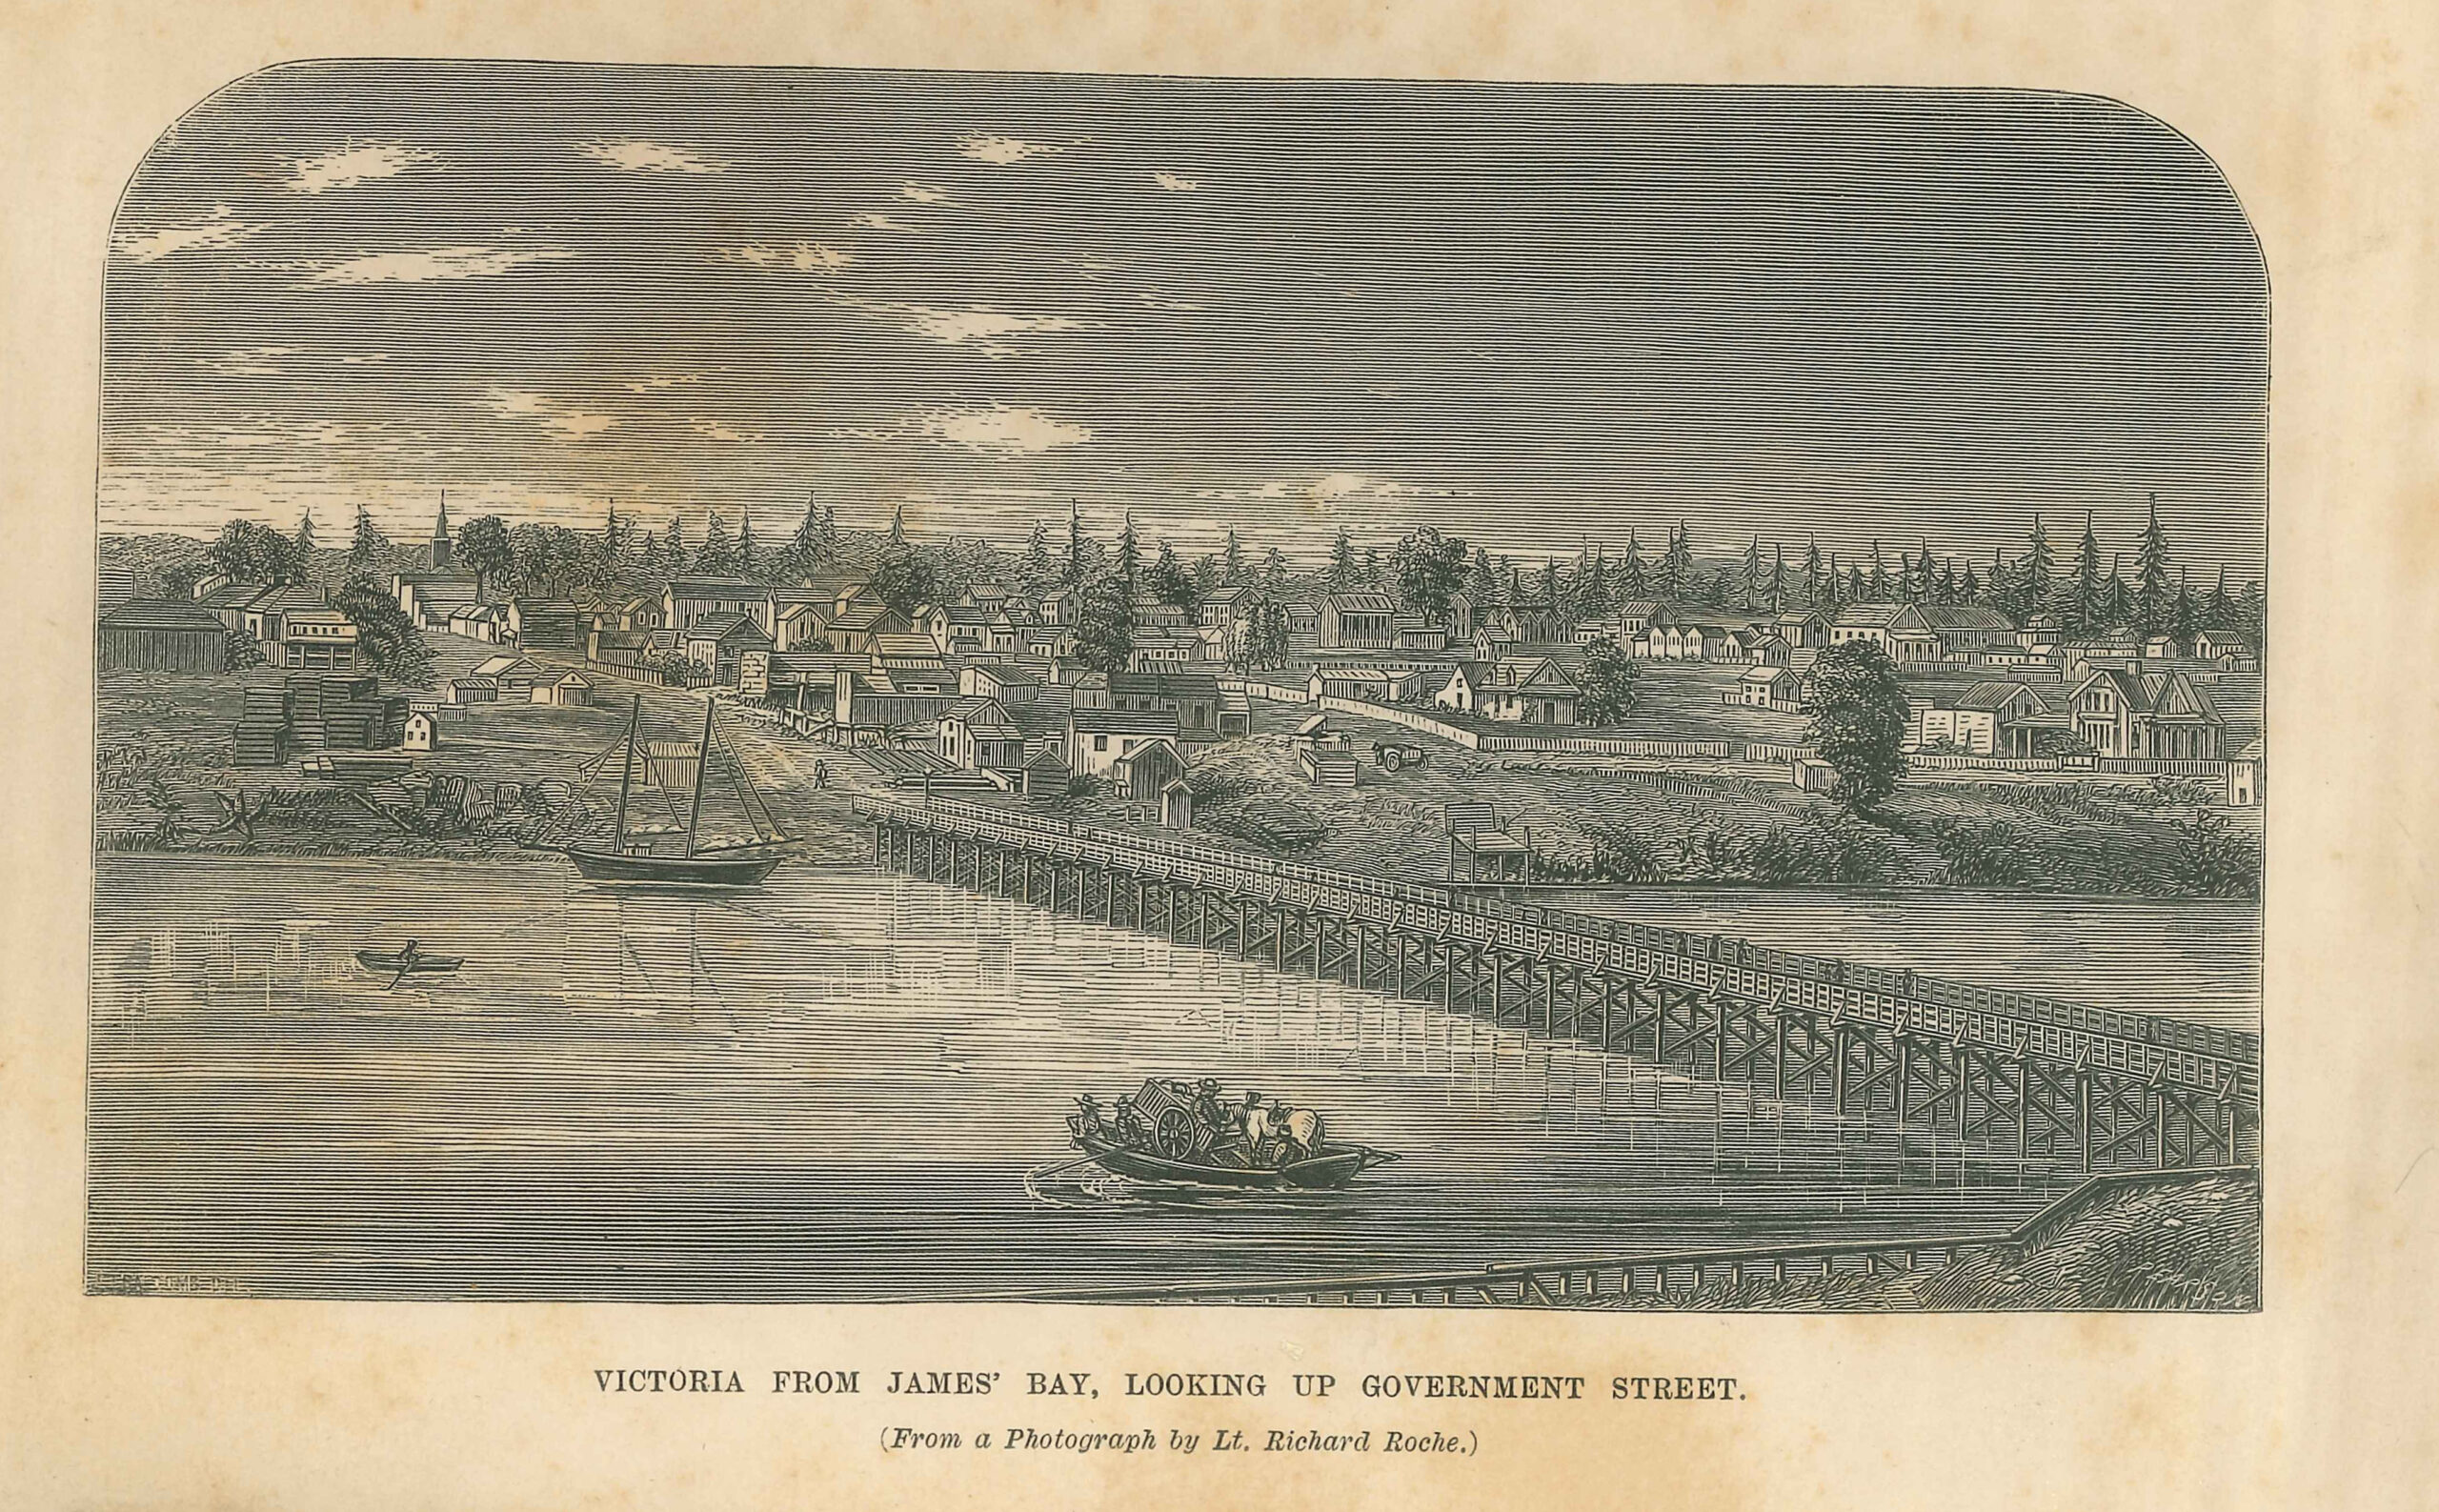 An illustration shows a bay with three boats on it and a bridge across it. On the shore are many houses and trees behind them.